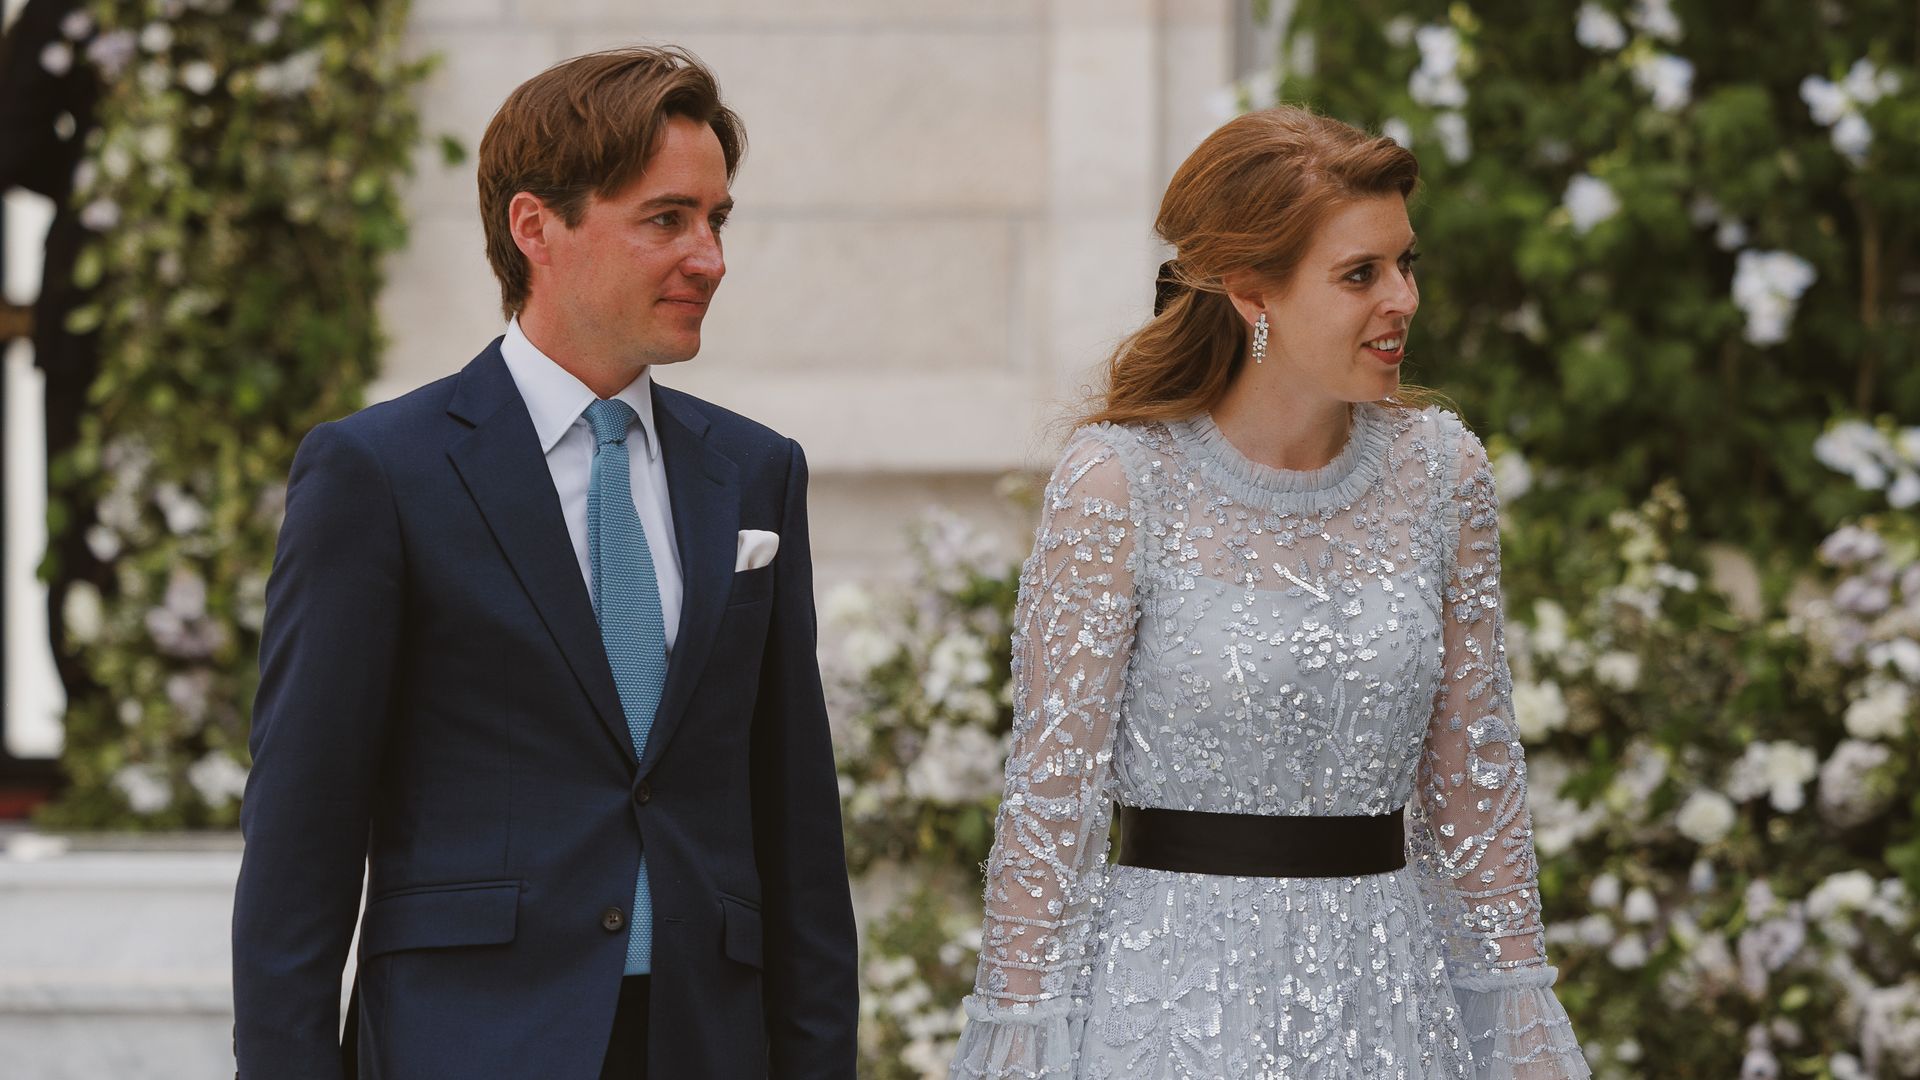 Princess Beatrice looking incredible in a Needle & Thread dress